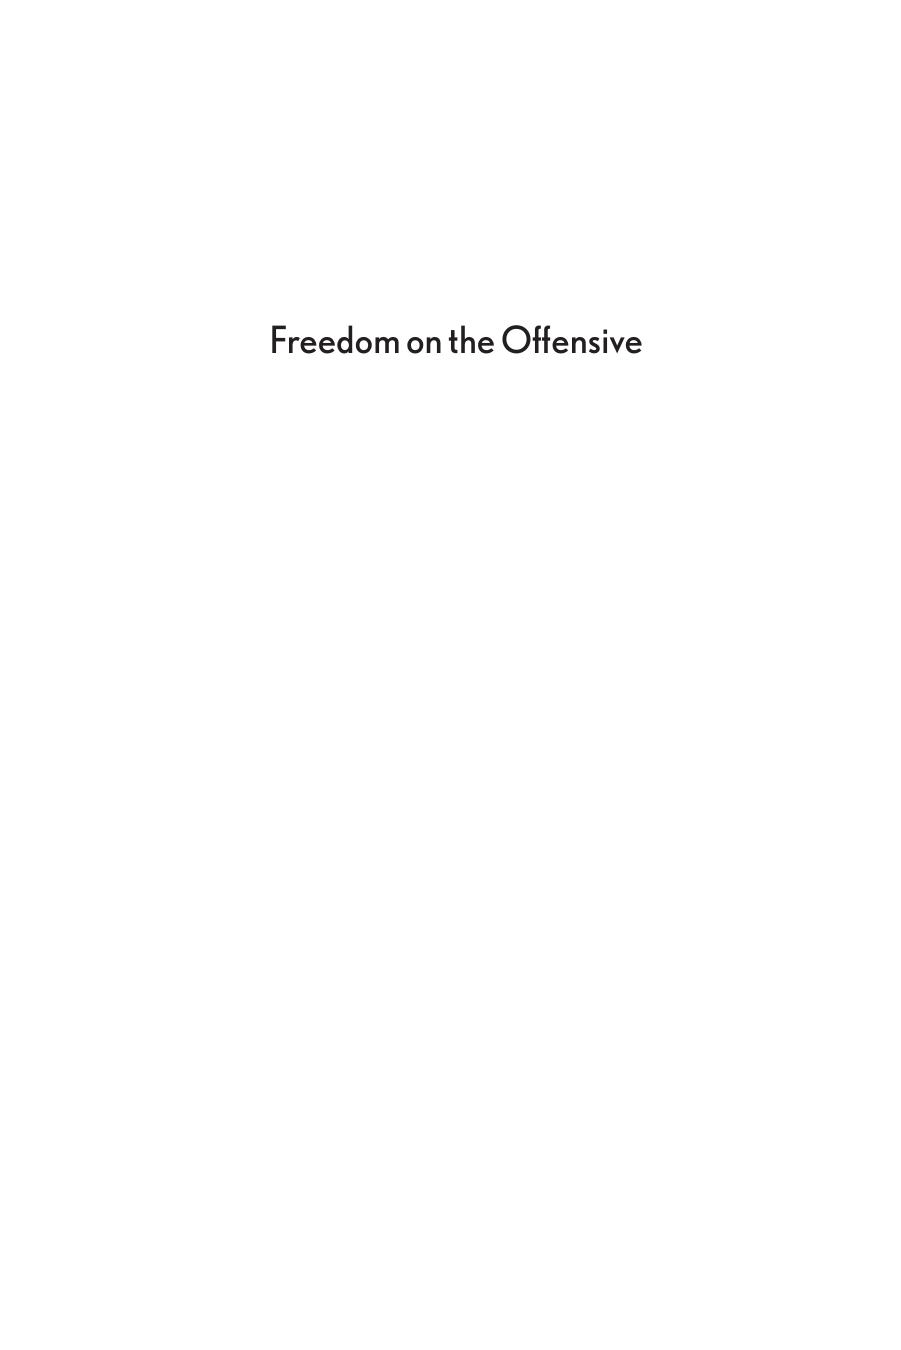 Freedom on the Offensive: Human Rights, Democracy Promotion, and US Interventionism in the Late Cold War by William Michael Schmidli